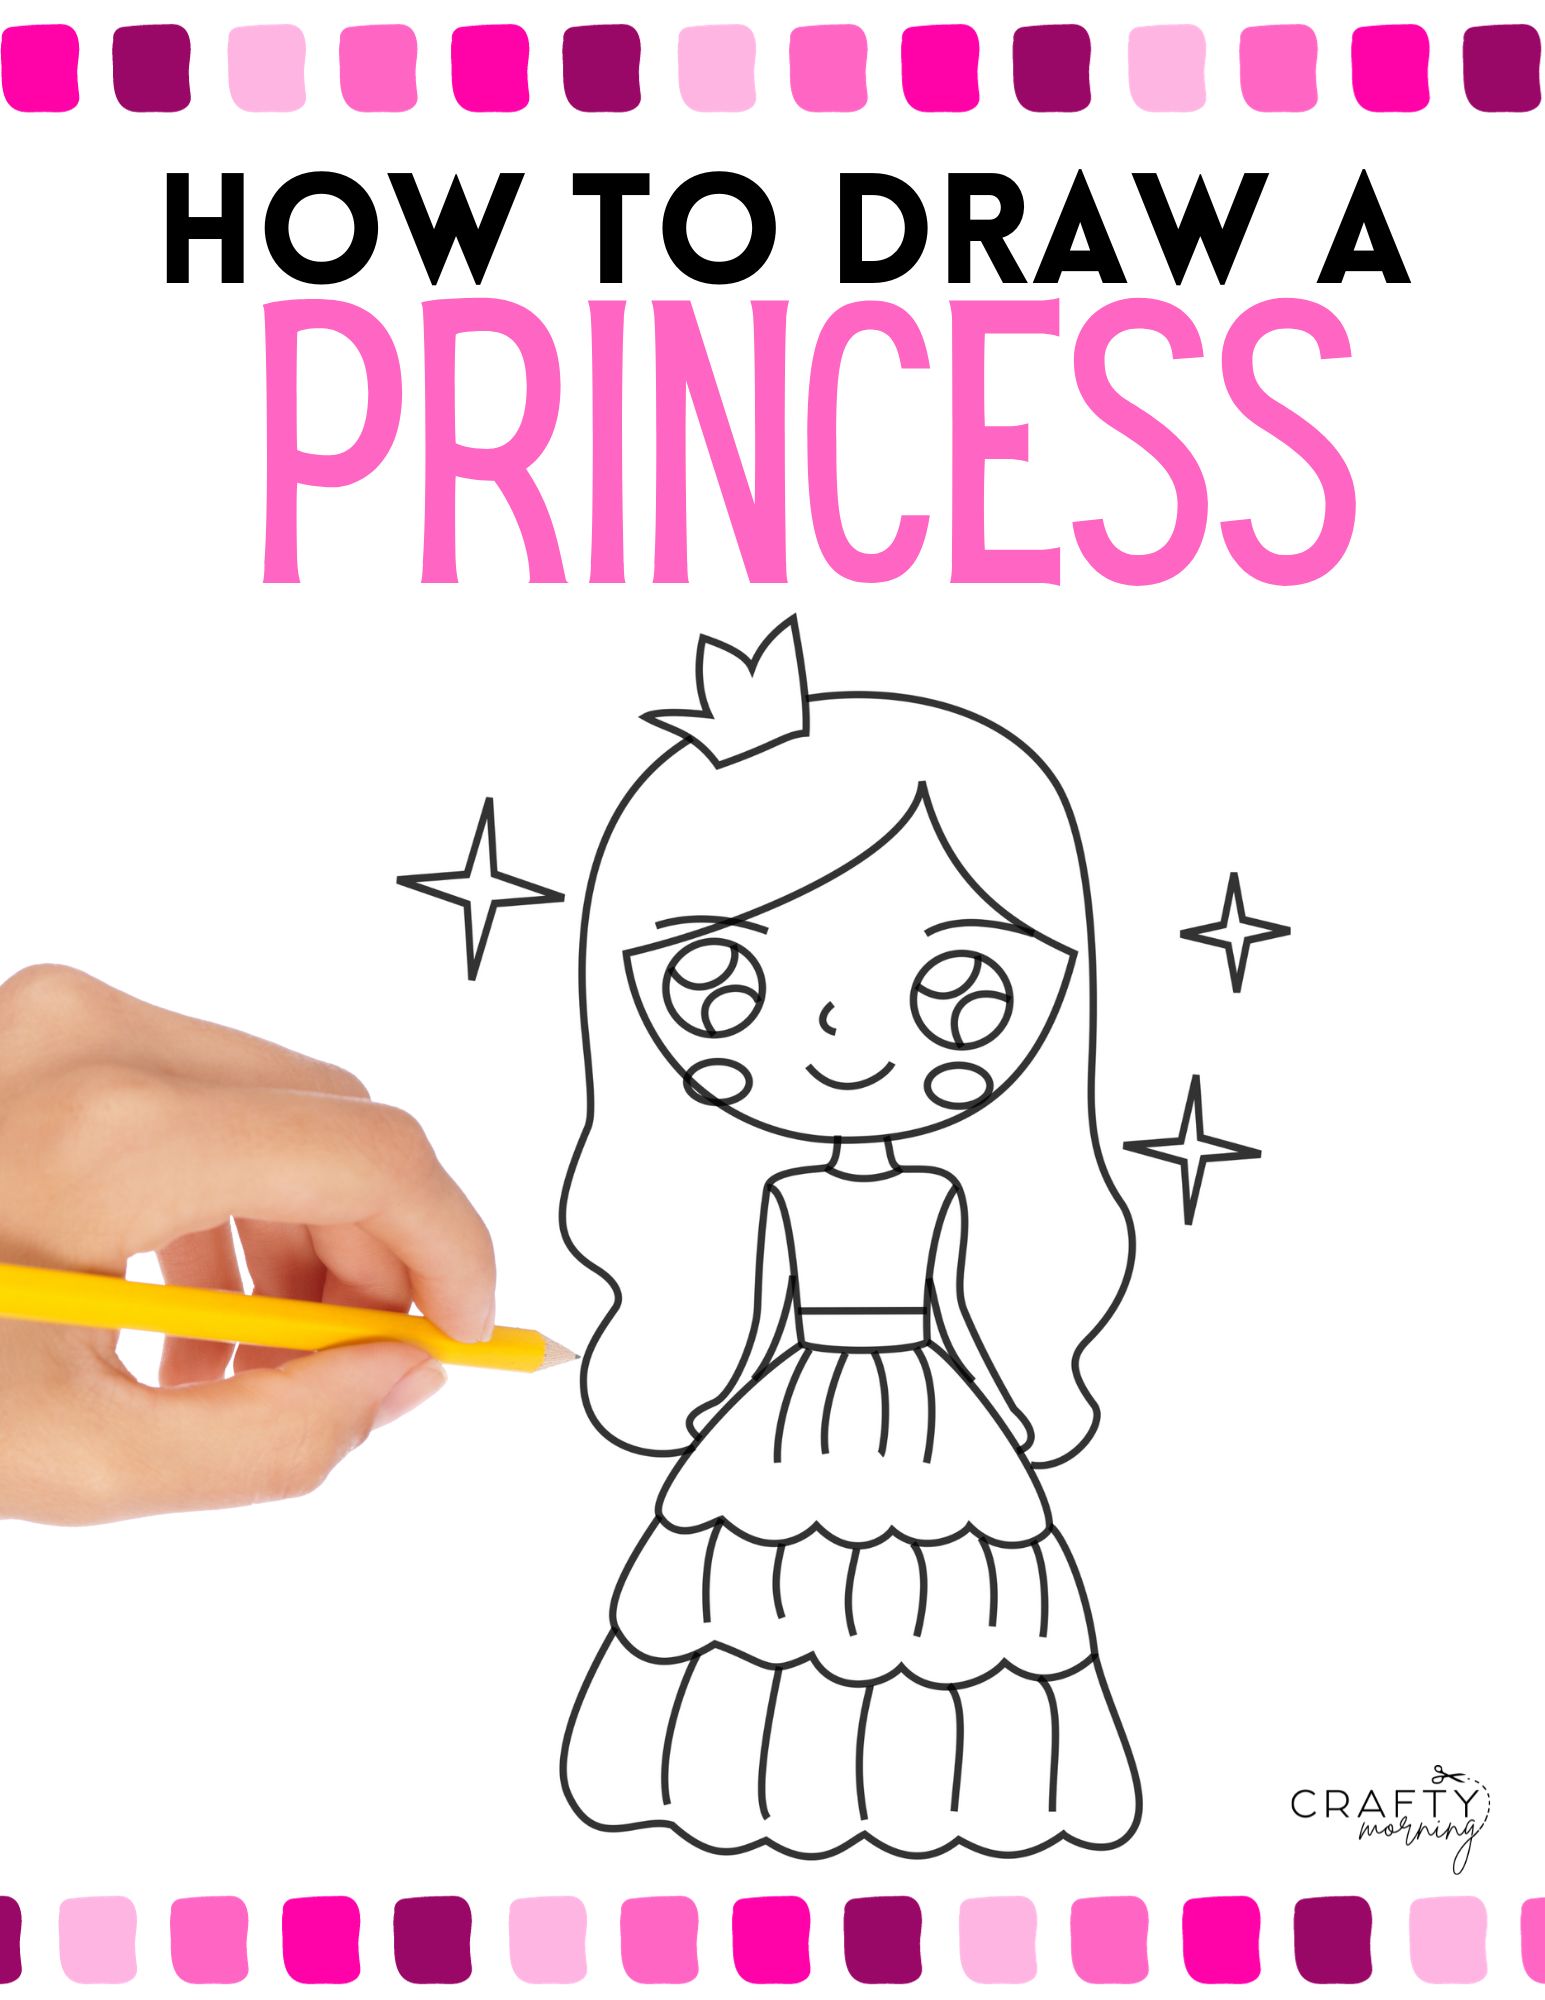 Free Printable Kids Simple Drawing / Coloring Page - Princess dress - Shine  Kids Crafts | Free printable coloring pages, Free printable coloring,  Coloring pages